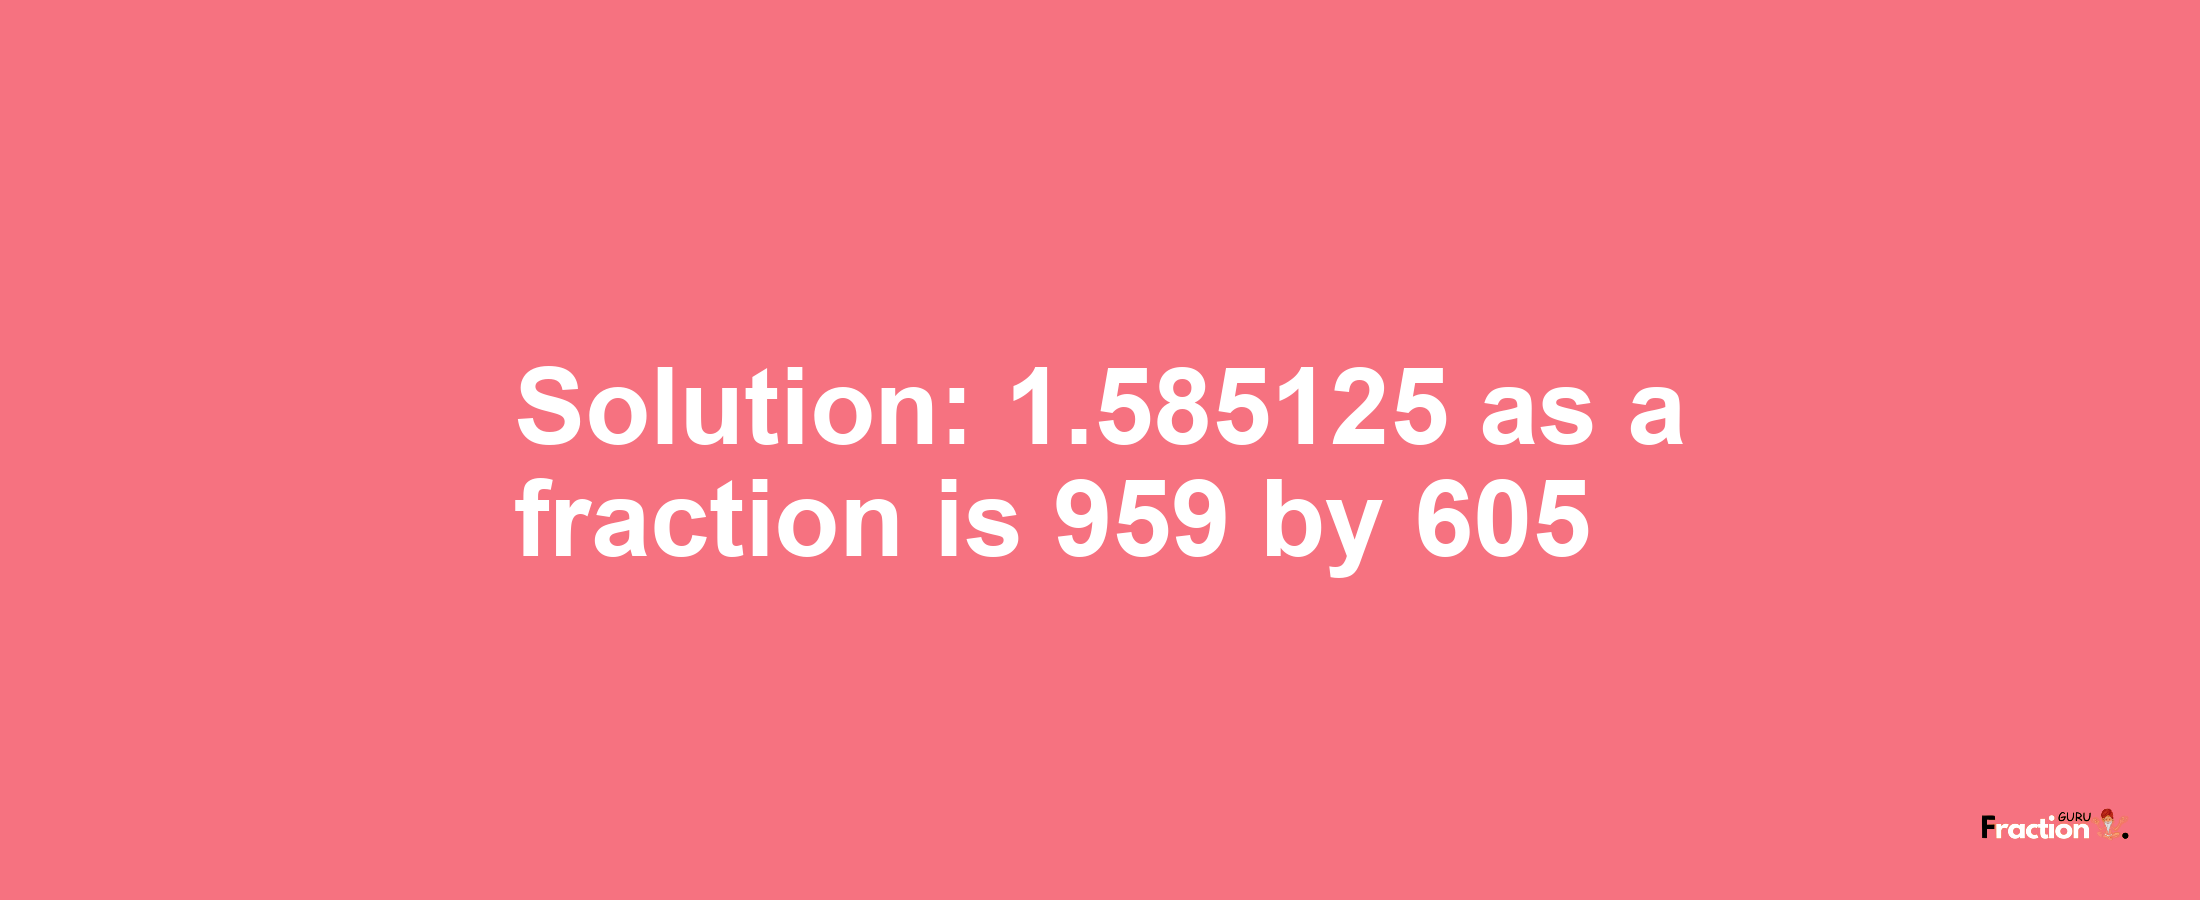 Solution:1.585125 as a fraction is 959/605